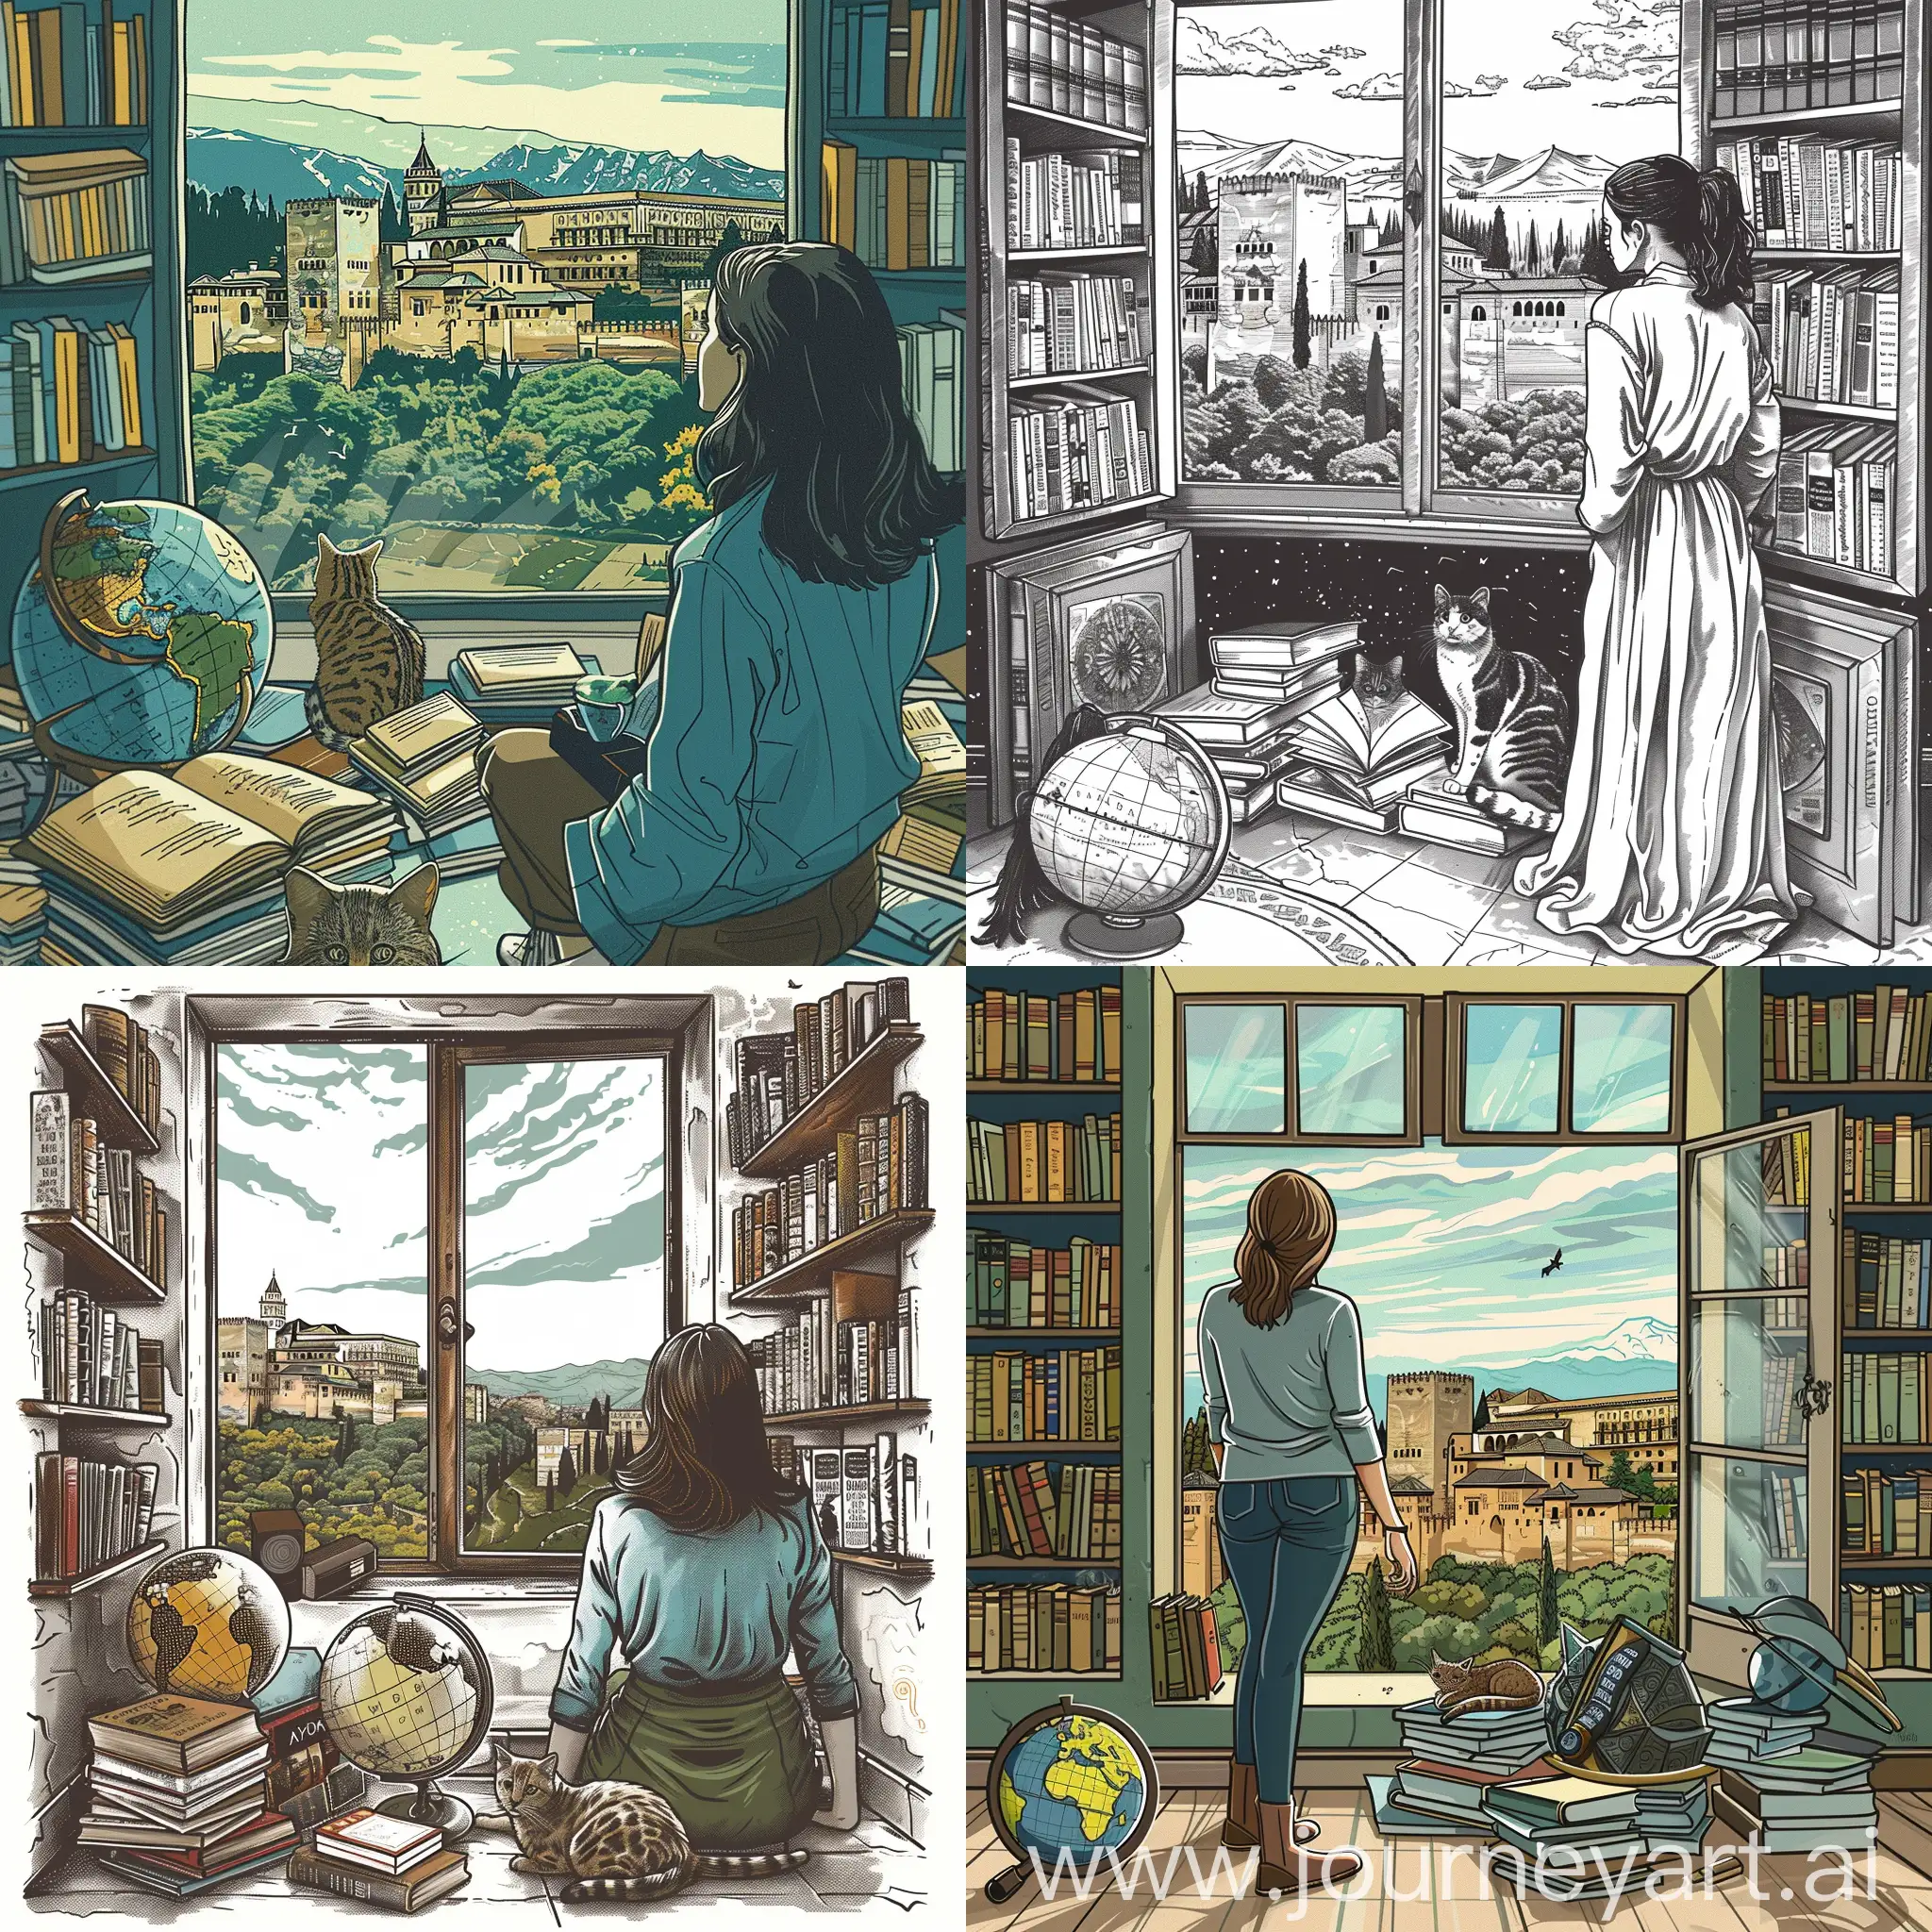 create an image with the exlibris style, so only the lines with the following image:  a woman looking out the window to alhambra in granada, and there is a world globe, a cat and a pile of books on the floor.